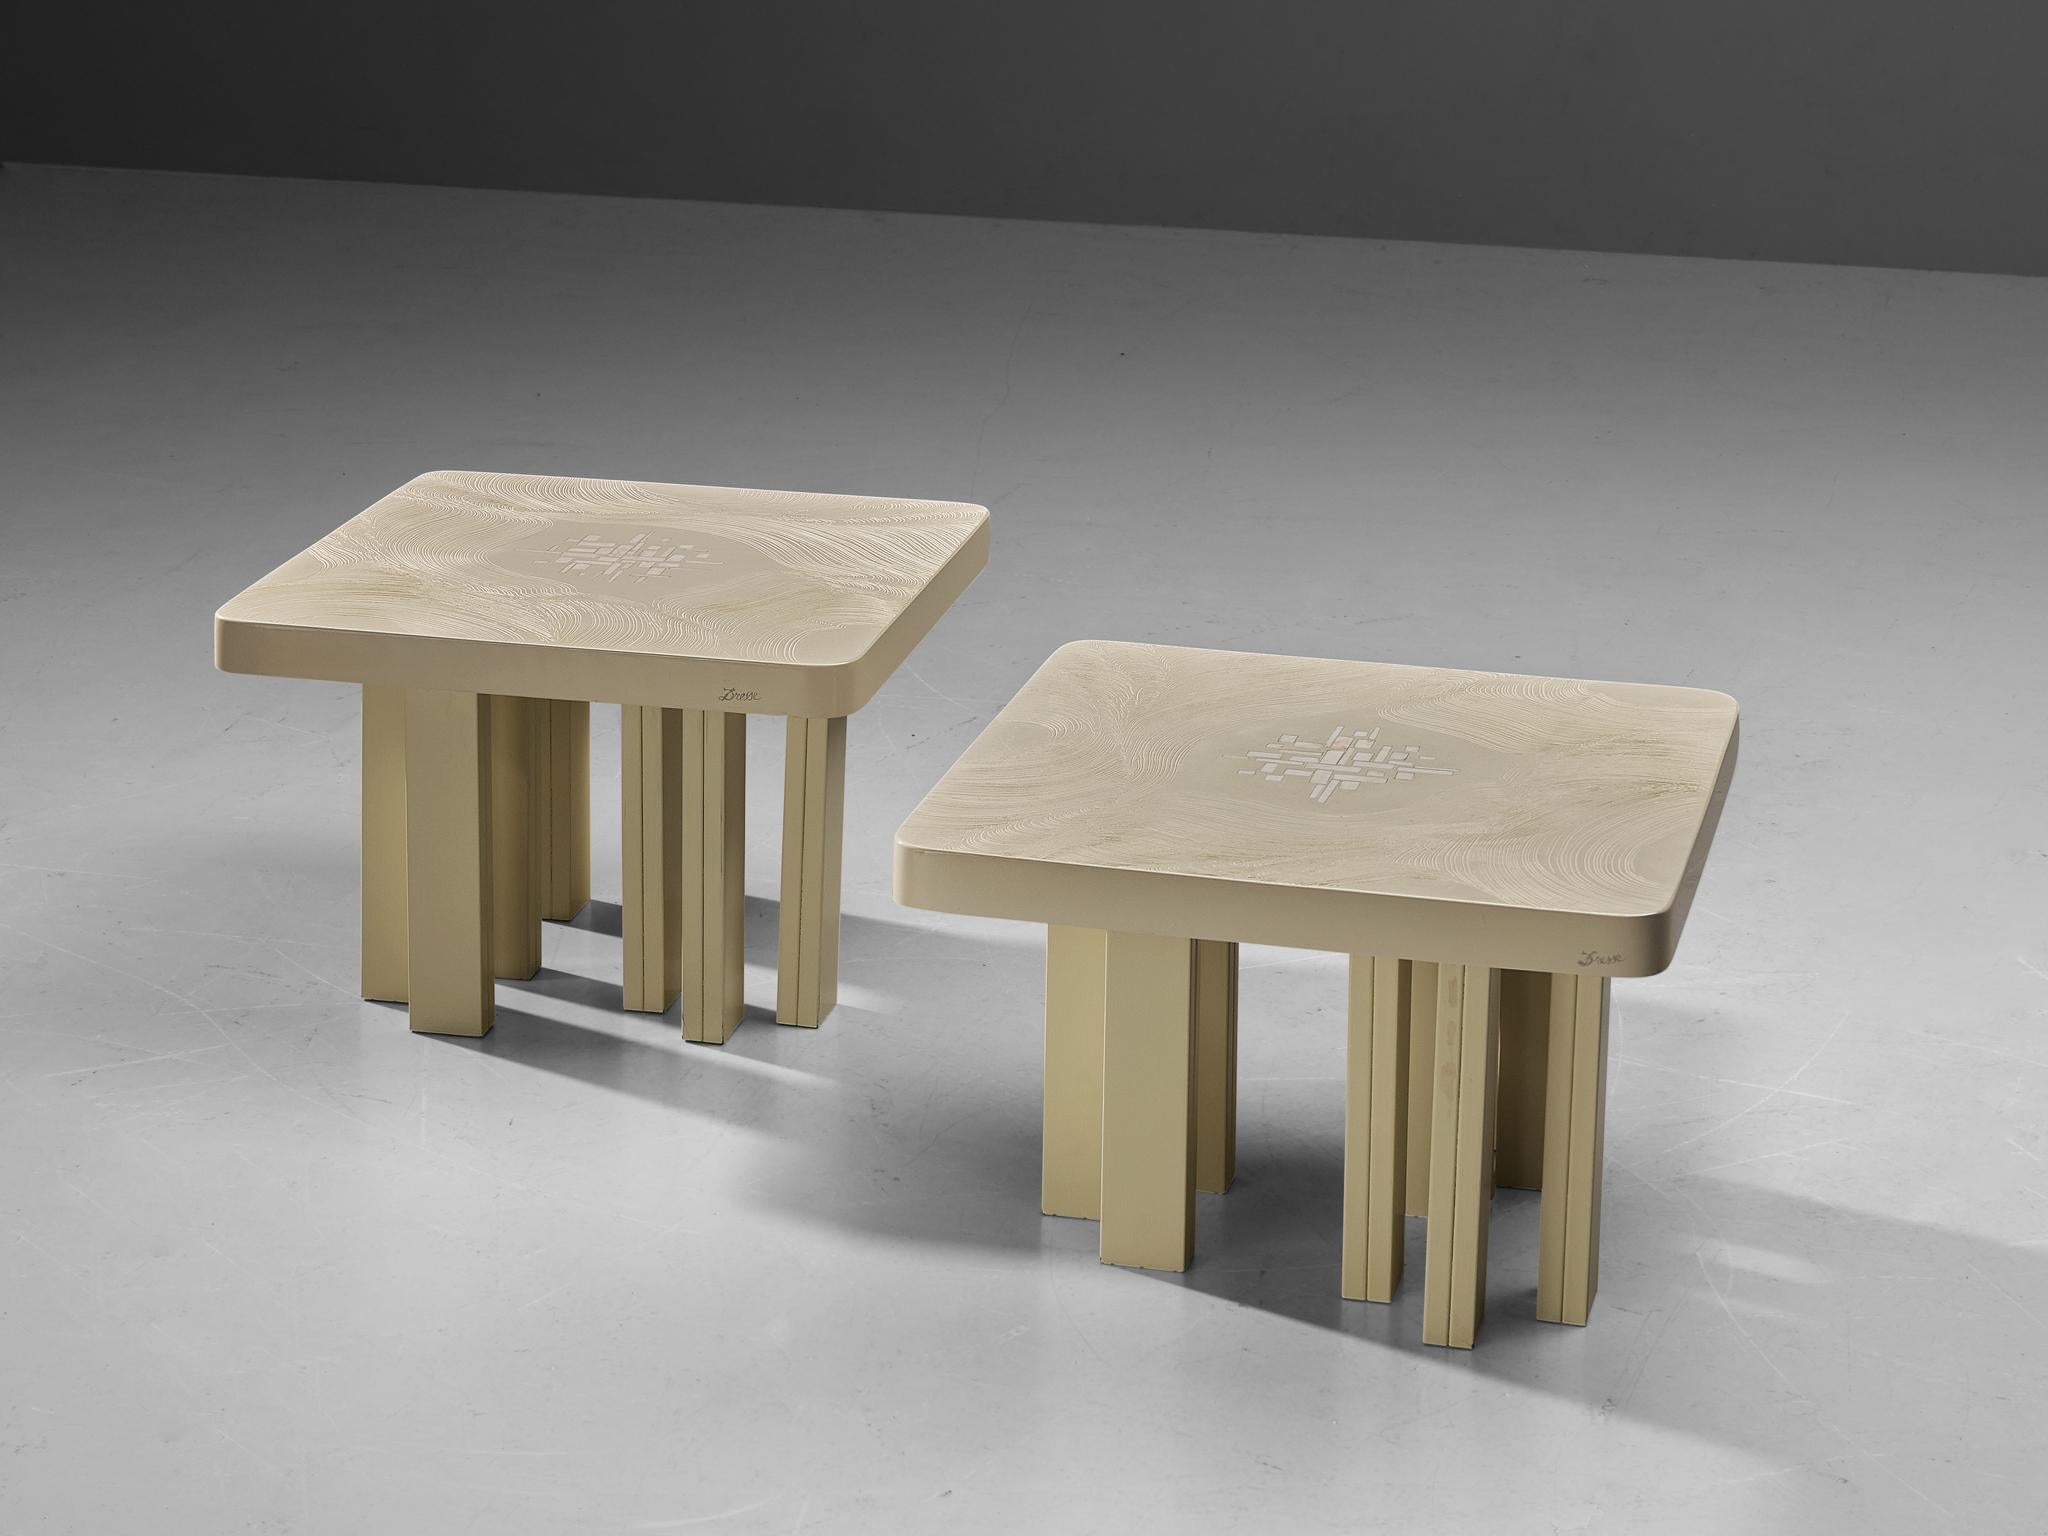 Jean Claude Dresse, pair of coffee tables, resin, bone, Belgium, circa. 1970 

These eccentric coffee tables are a design by the hand of Belgian designer Jean Claude Dresse. Observing the pieces now, every inch truly showcases the magnificent